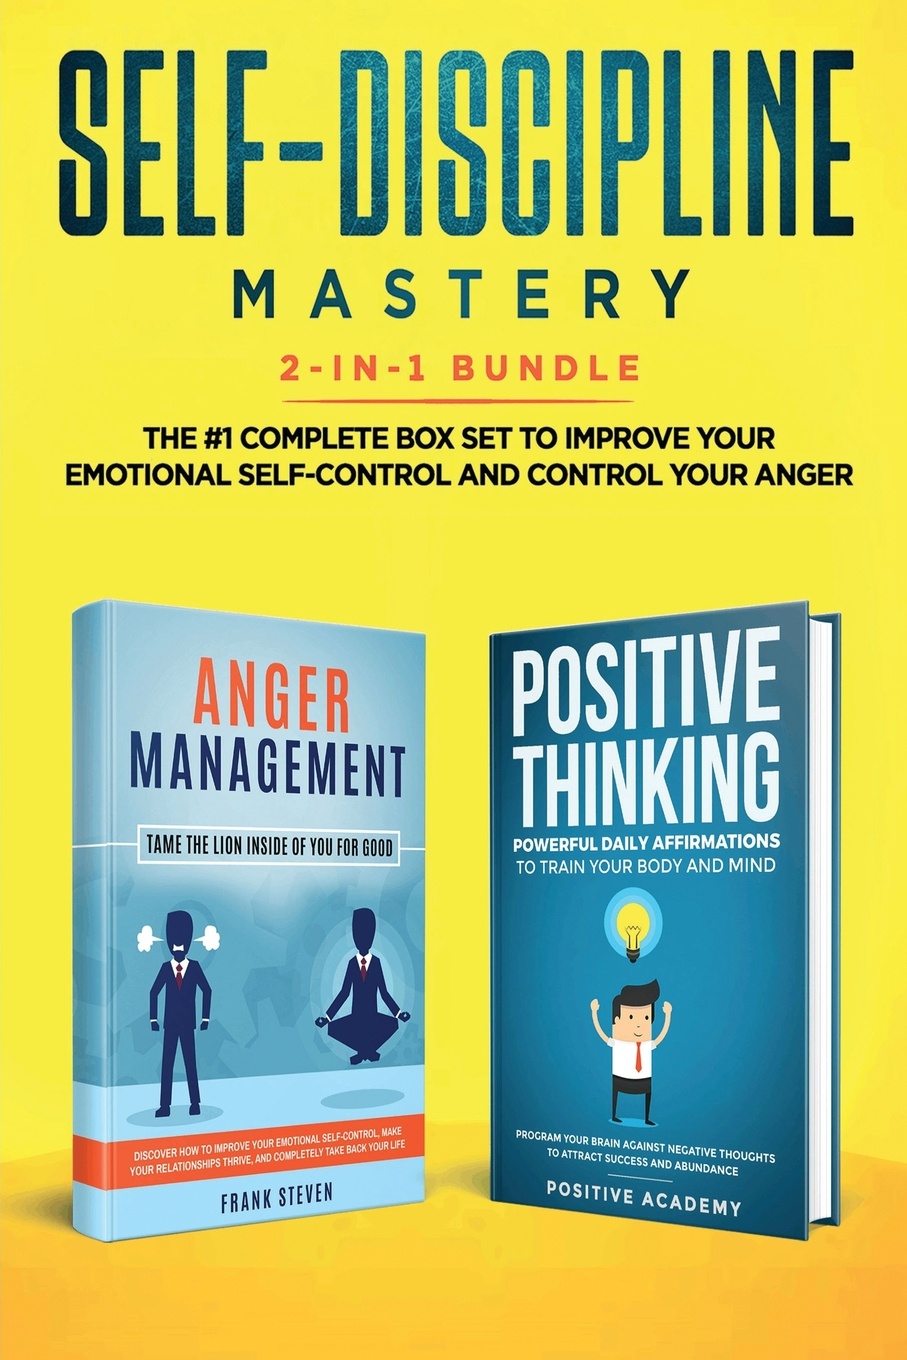 Self-Discipline Mastery 2-in-1 Bundle. Anger Management + Positive Thinking Affirmations - The #1 Complete Box Set to Improve Your Emotional Self-Control and Control Your Anger